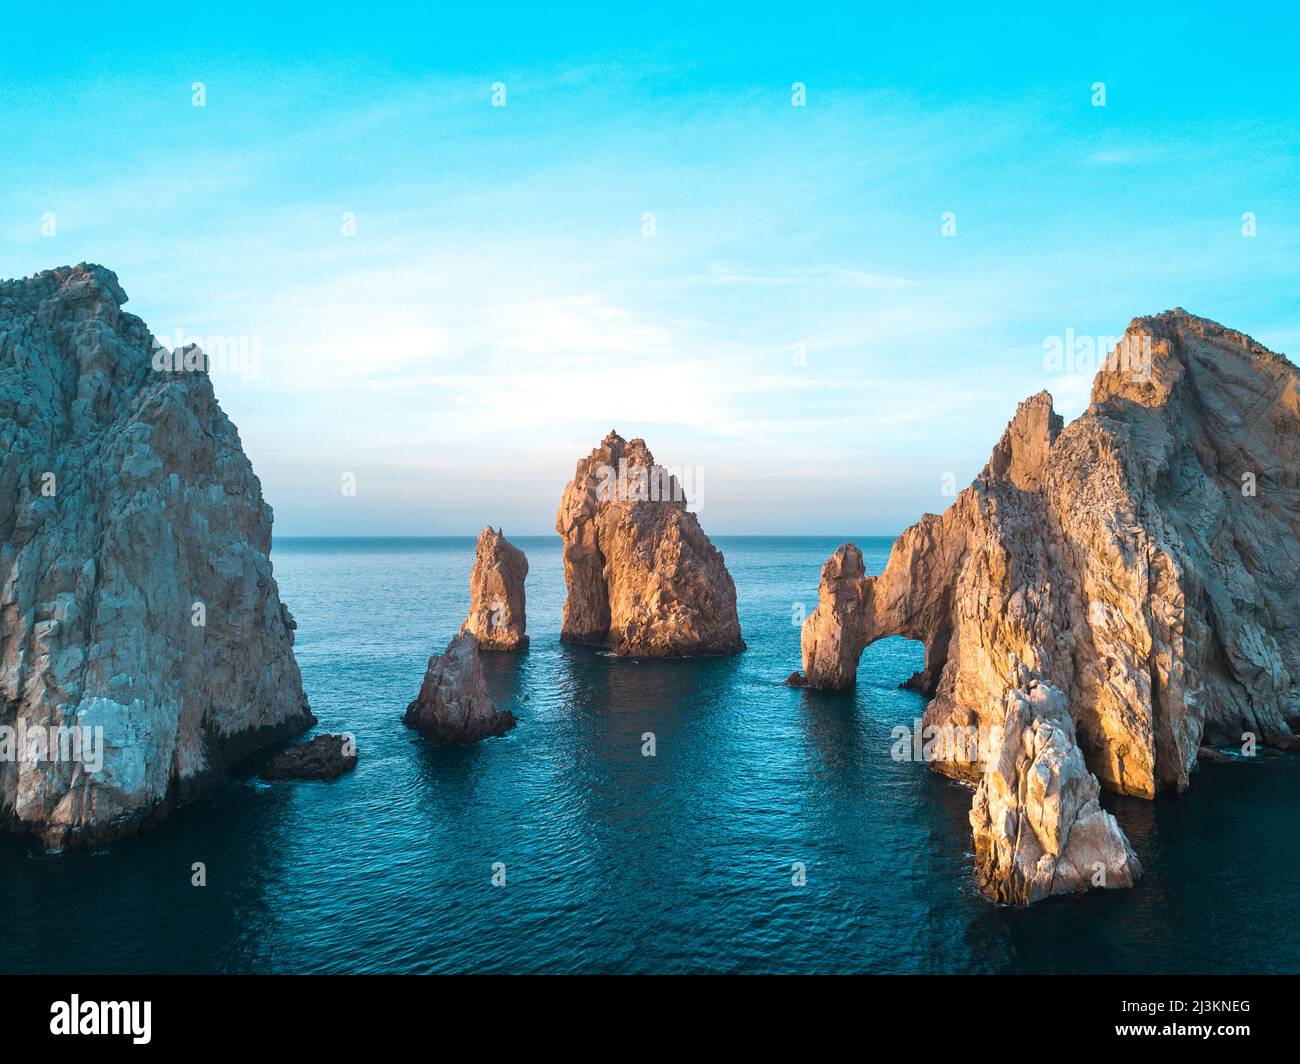 Dramatic rock formations and Arcos de Cabo San Lucas (Arch of Cabo San Lucas) on the coast at Lands End at sunset Stock Photo